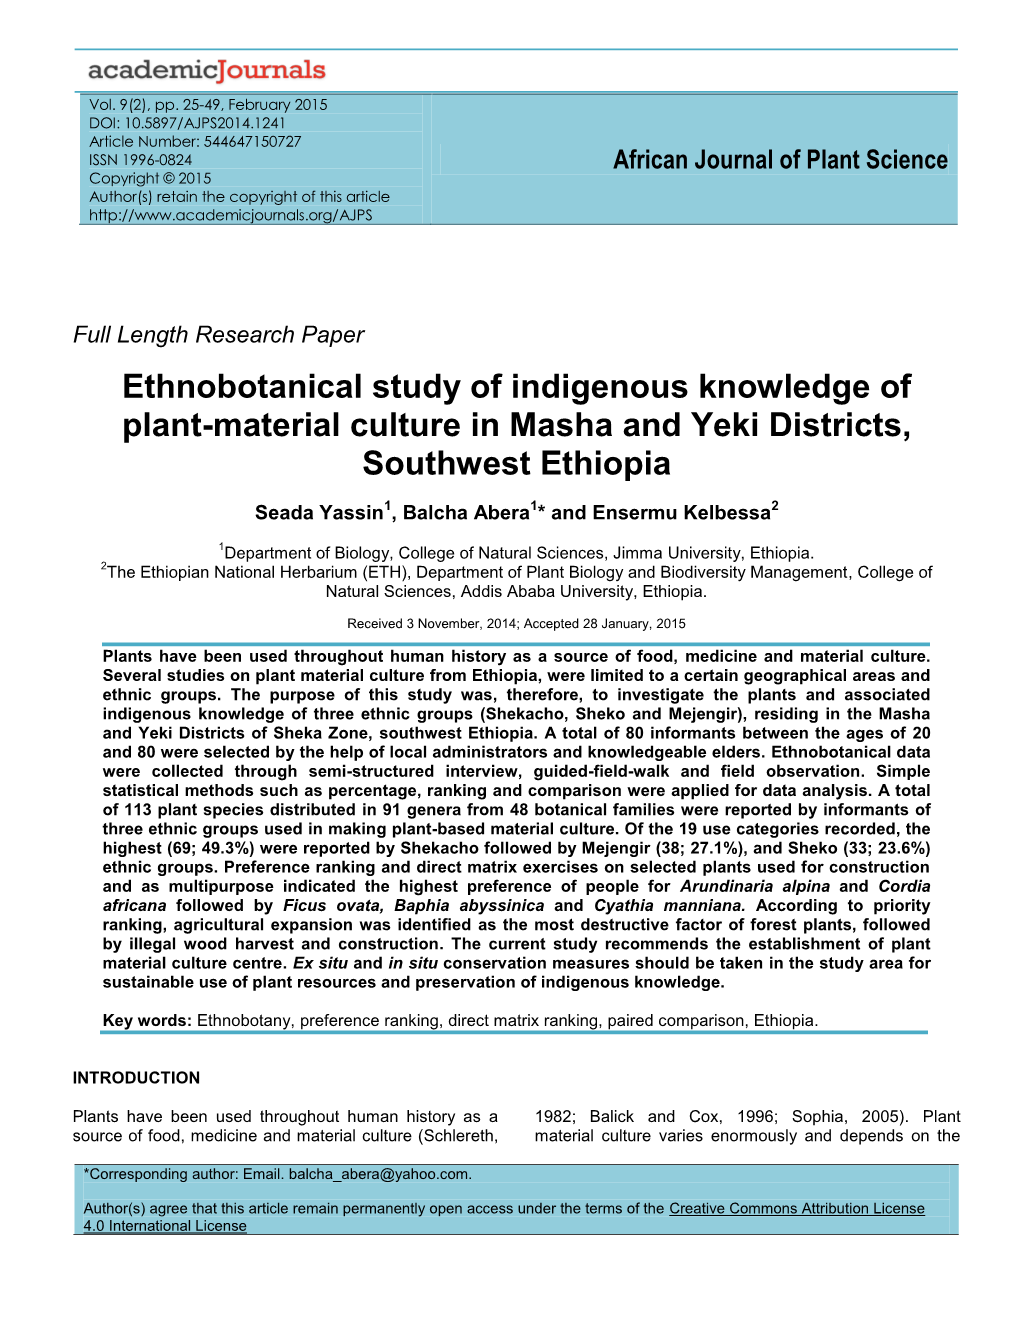 Ethnobotanical Study of Indigenous Knowledge of Plant-Material Culture in Masha and Yeki Districts, Southwest Ethiopia